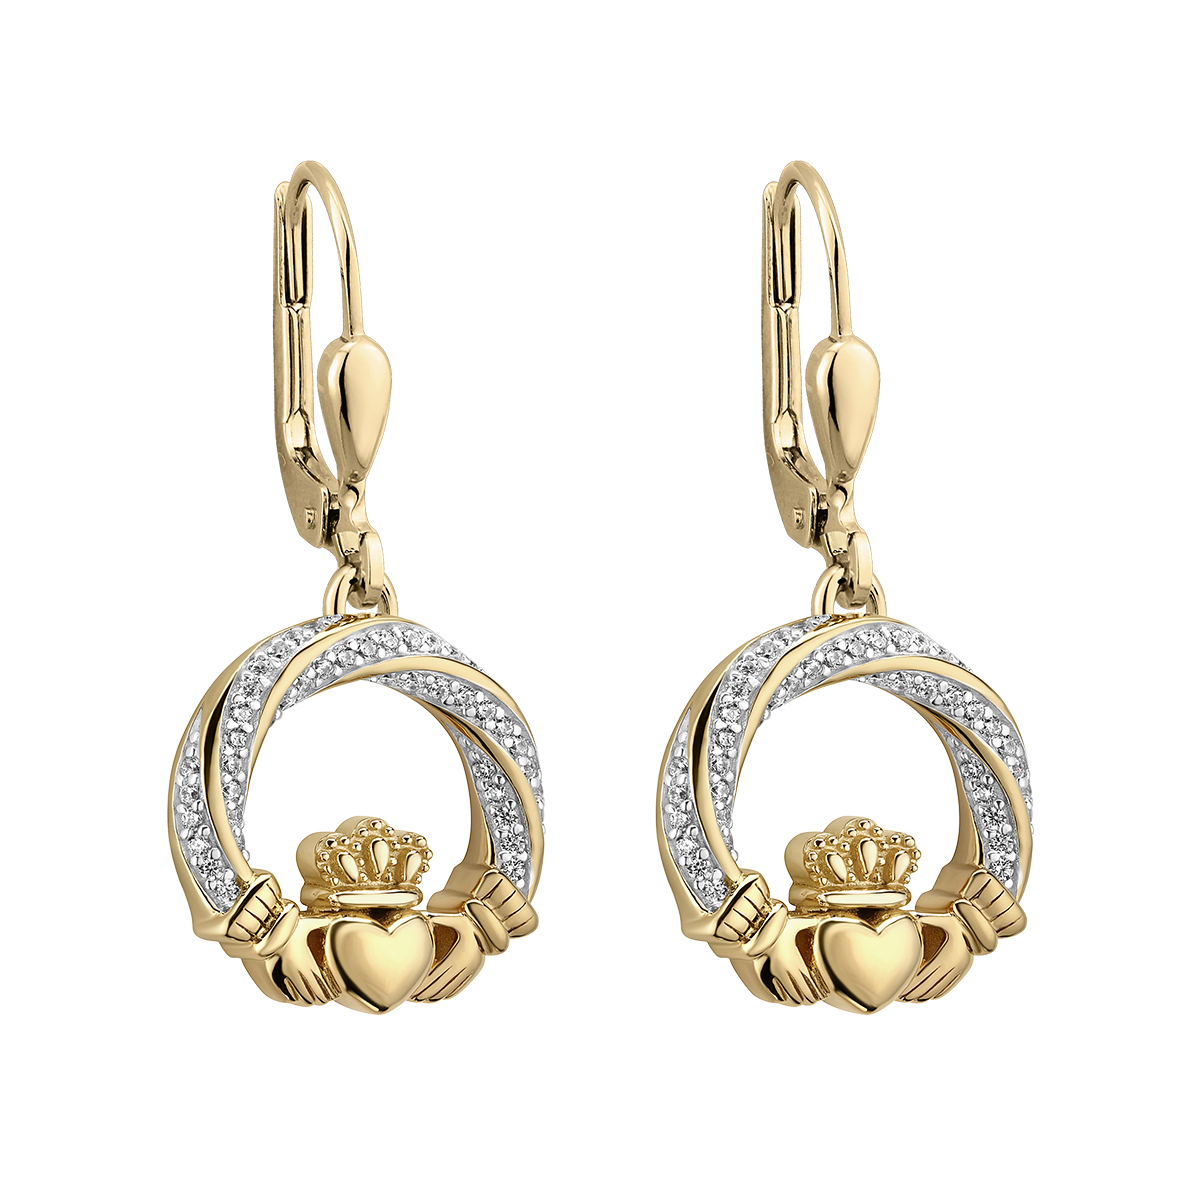 Product image for Irish Earrings | Vermeil Gold Overlay Sterling Silver Drop Crystal Claddagh Earrings